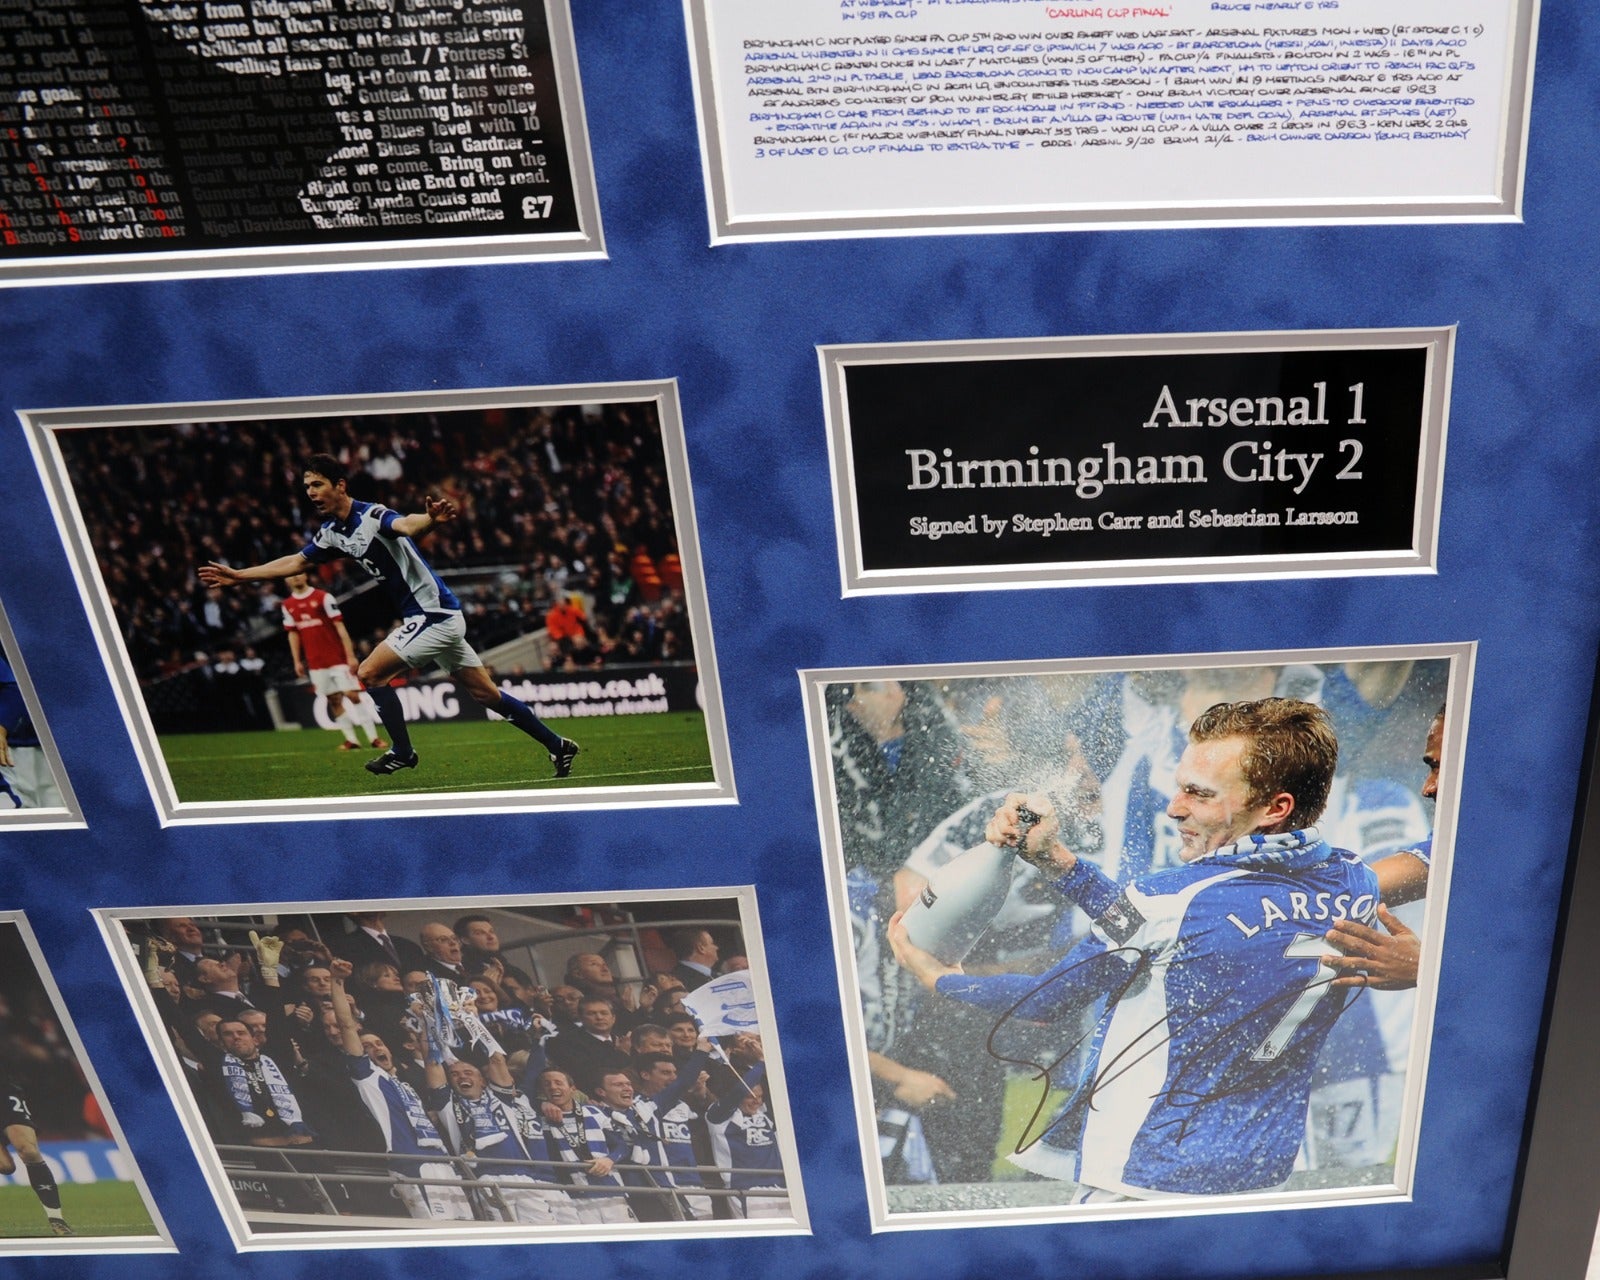 Stephen Carr and Sebastian Larsson Signed Birmingham City Carling Cup Frame with Clive Tyldsley's commentary notes